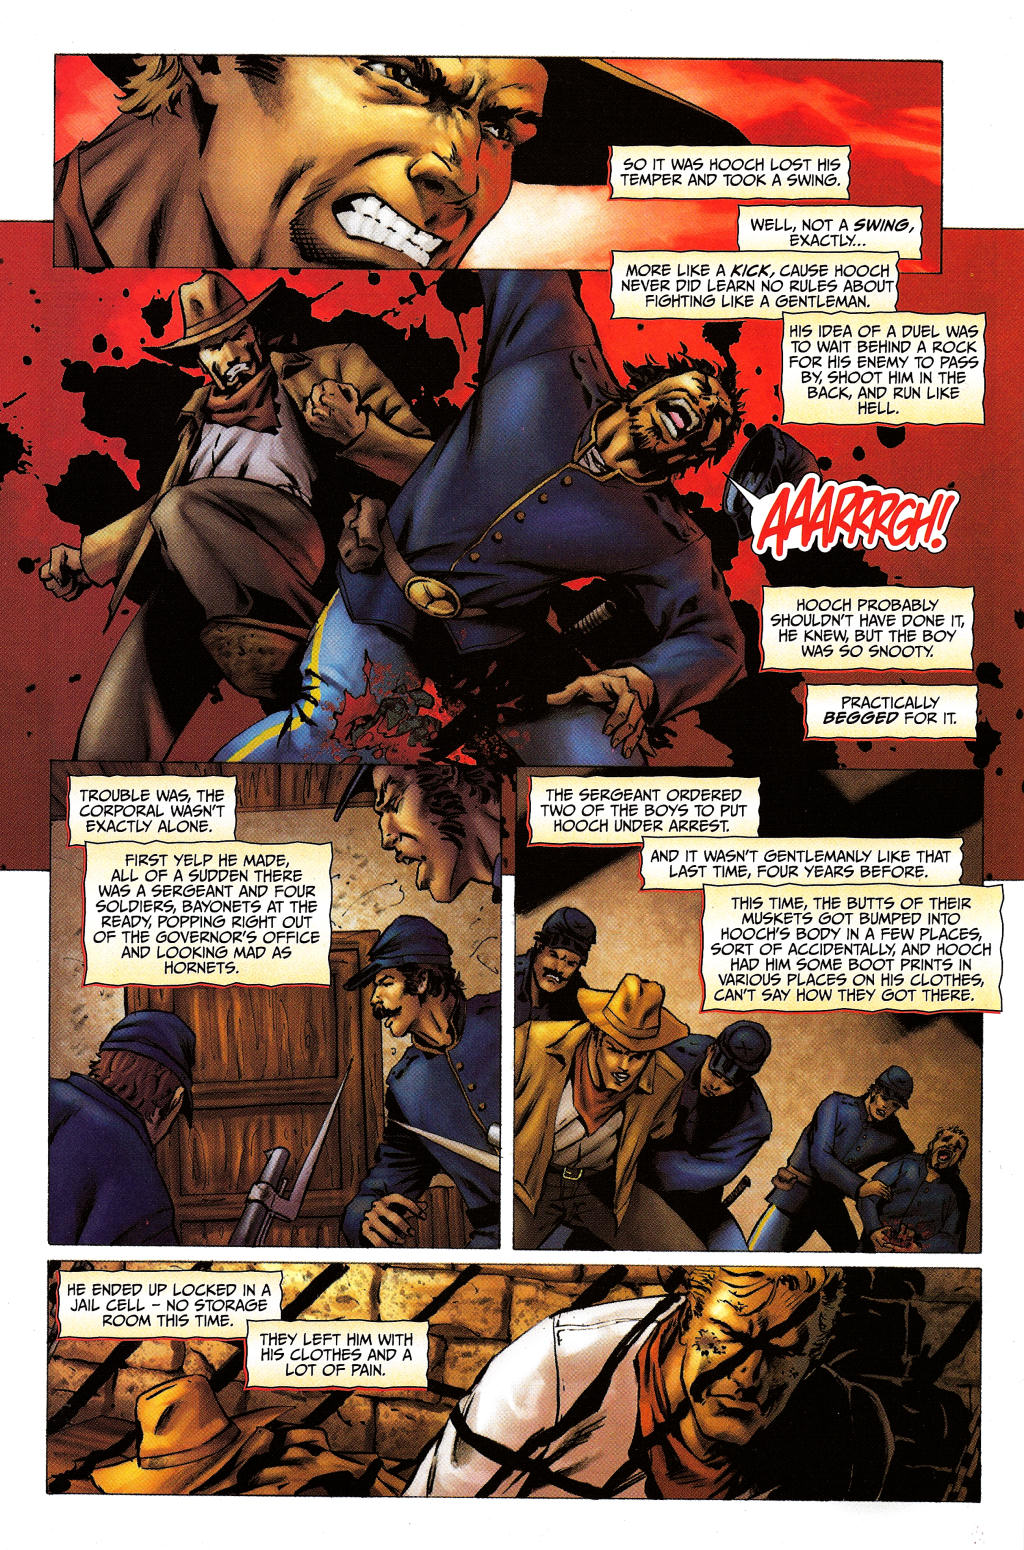 Red Prophet: The Tales of Alvin Maker issue 4 - Page 6